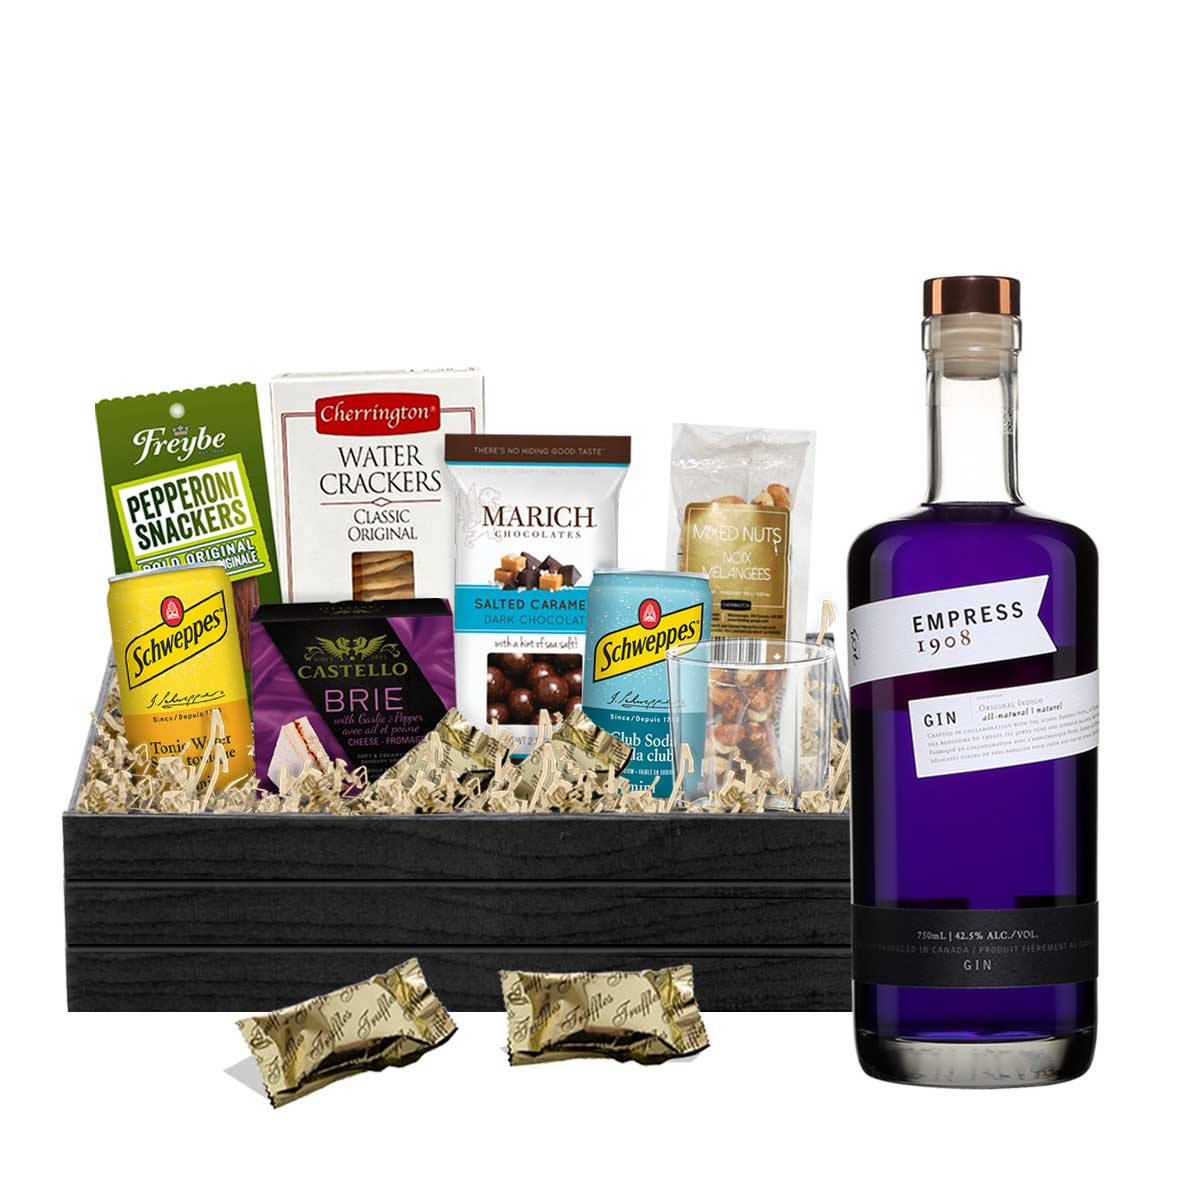 Empress 1908 Gin With Bundle Of Snacks Wallpaper